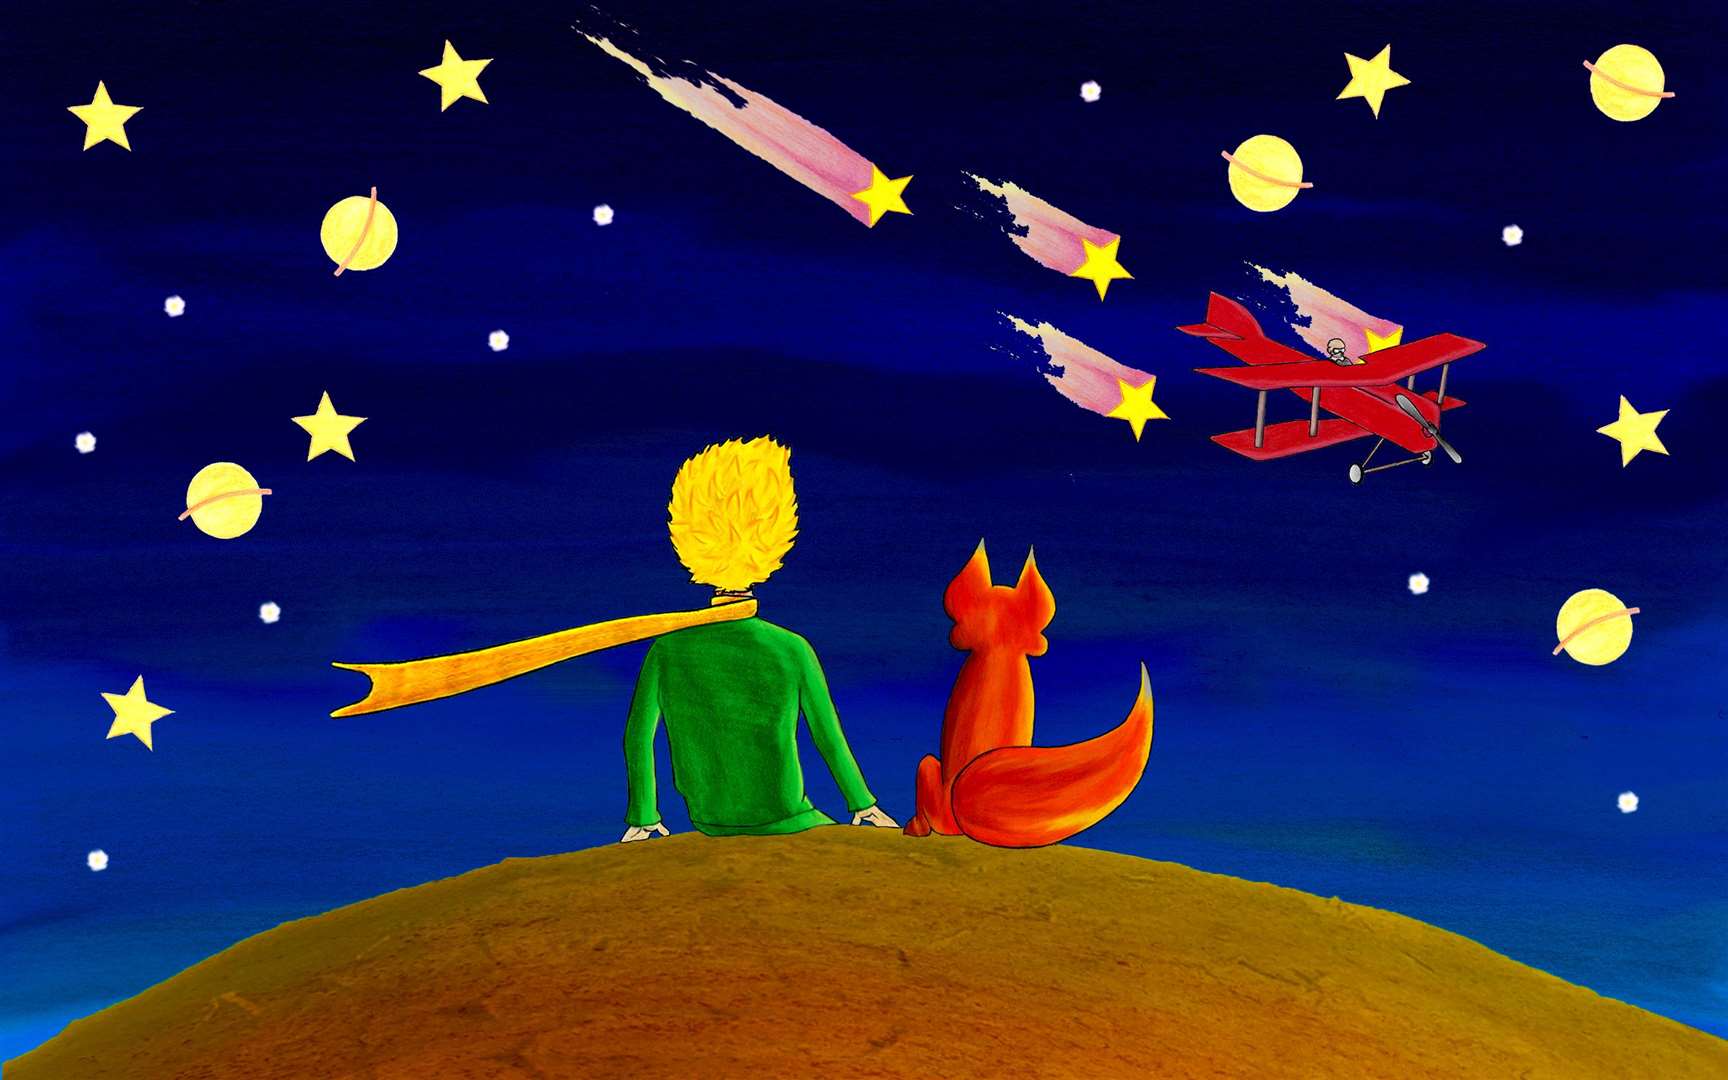 The Little Prince (7637711)